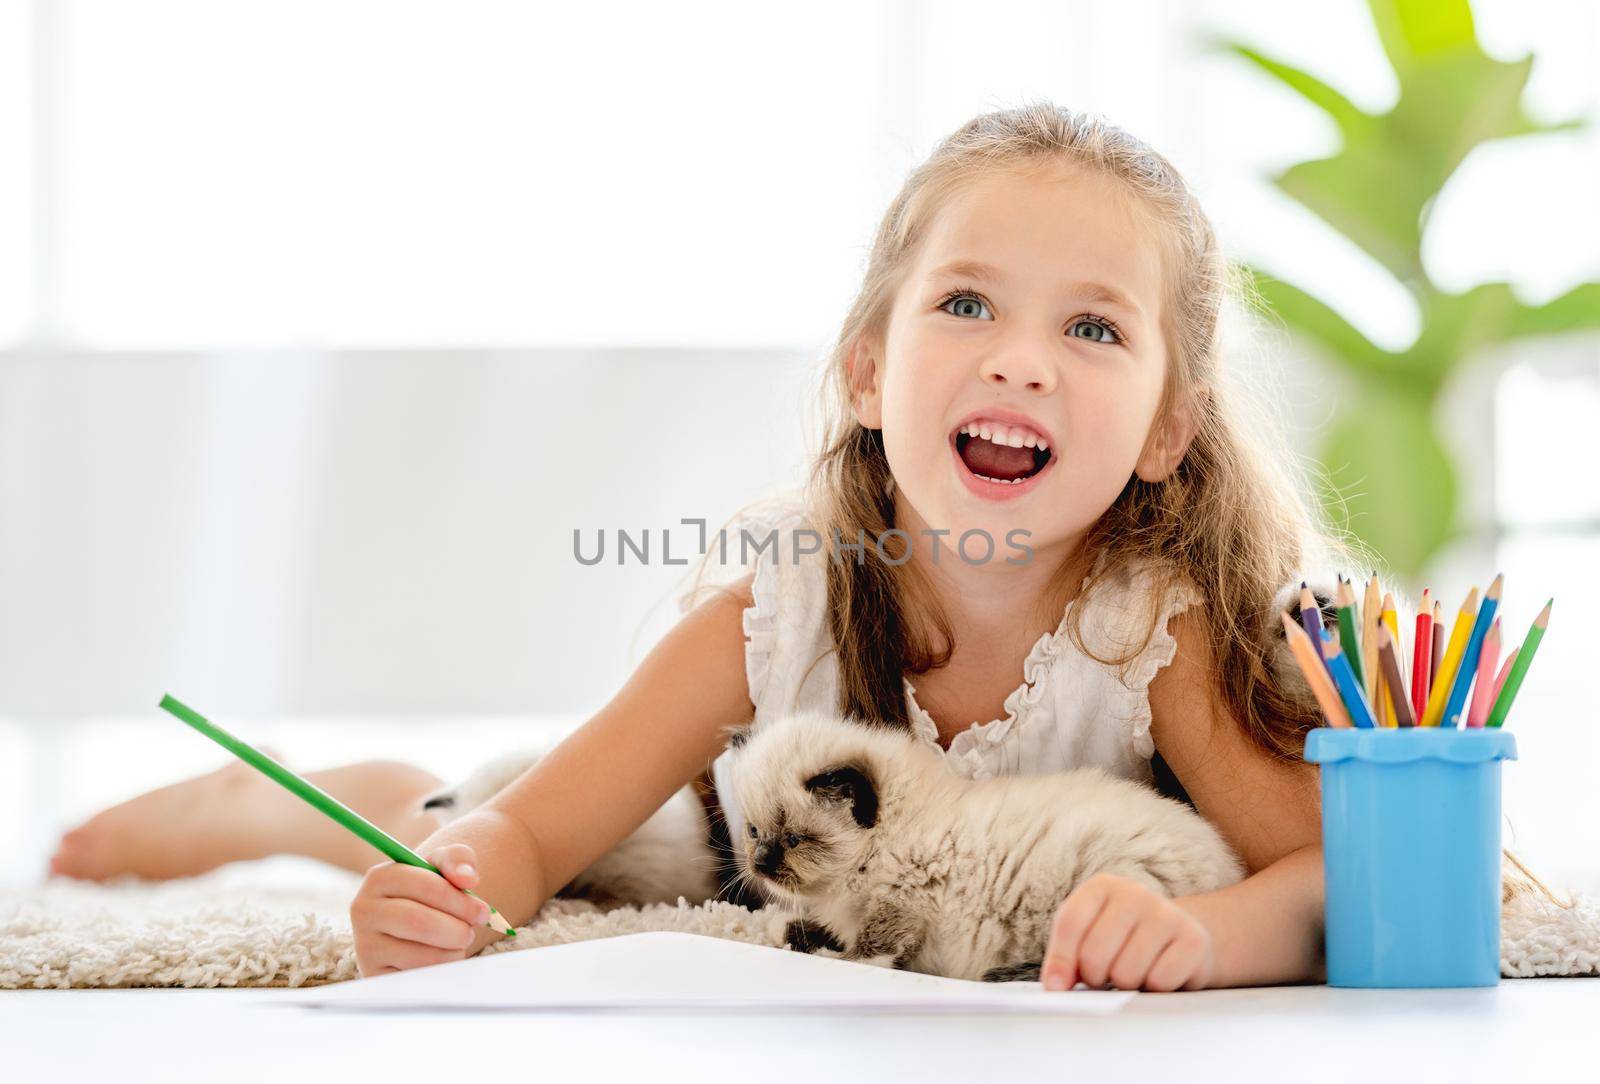 Girl painting with ragdoll kittens by tan4ikk1